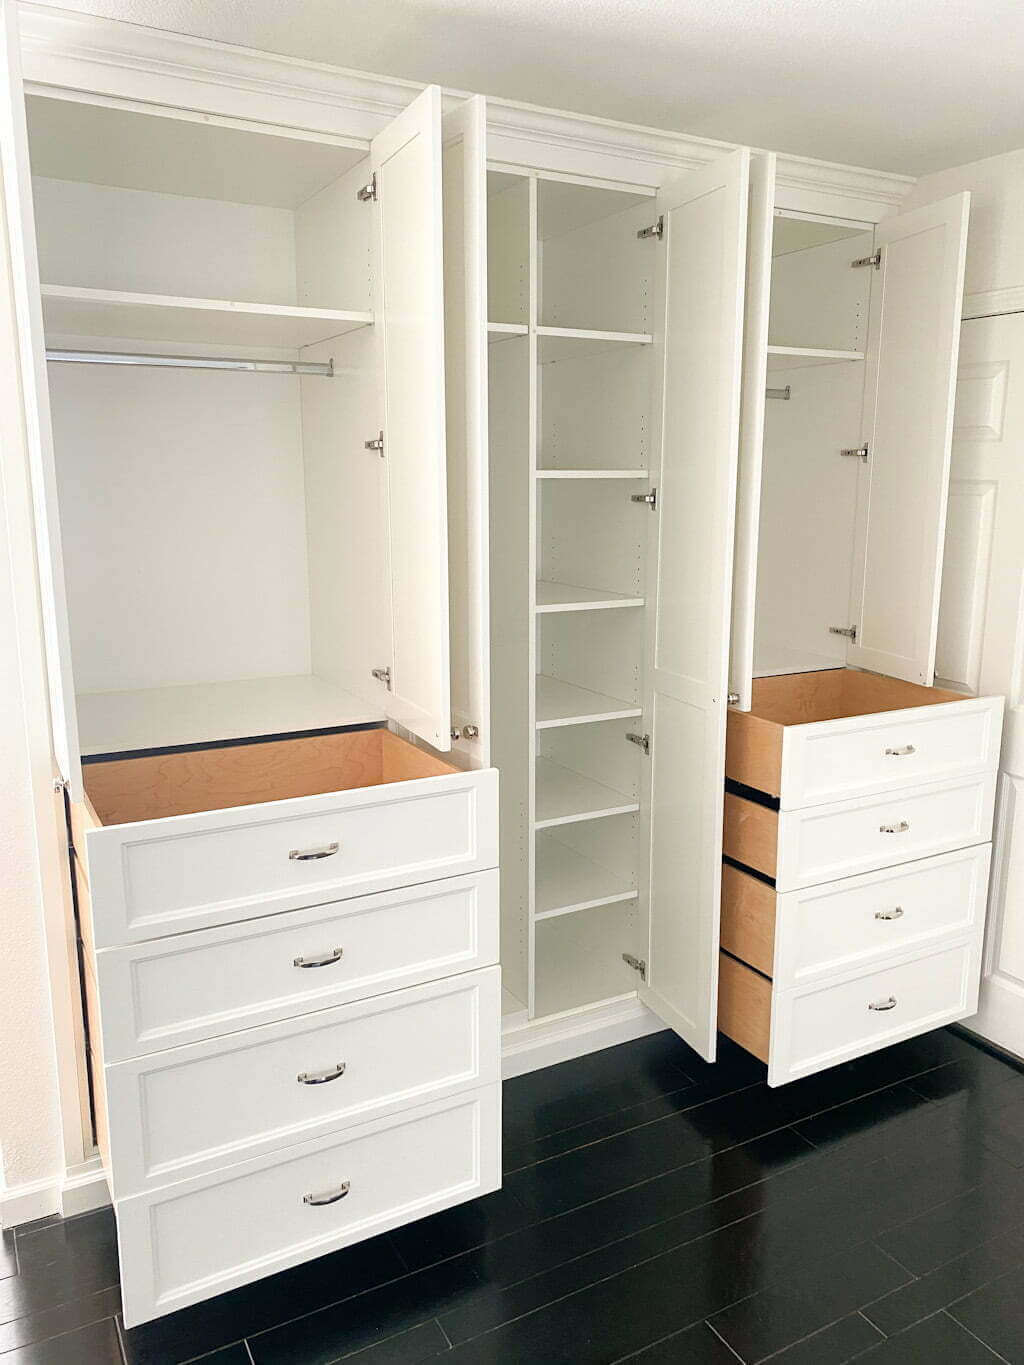 built in dresser in closet, white with silver hardware, and shelves and storage space